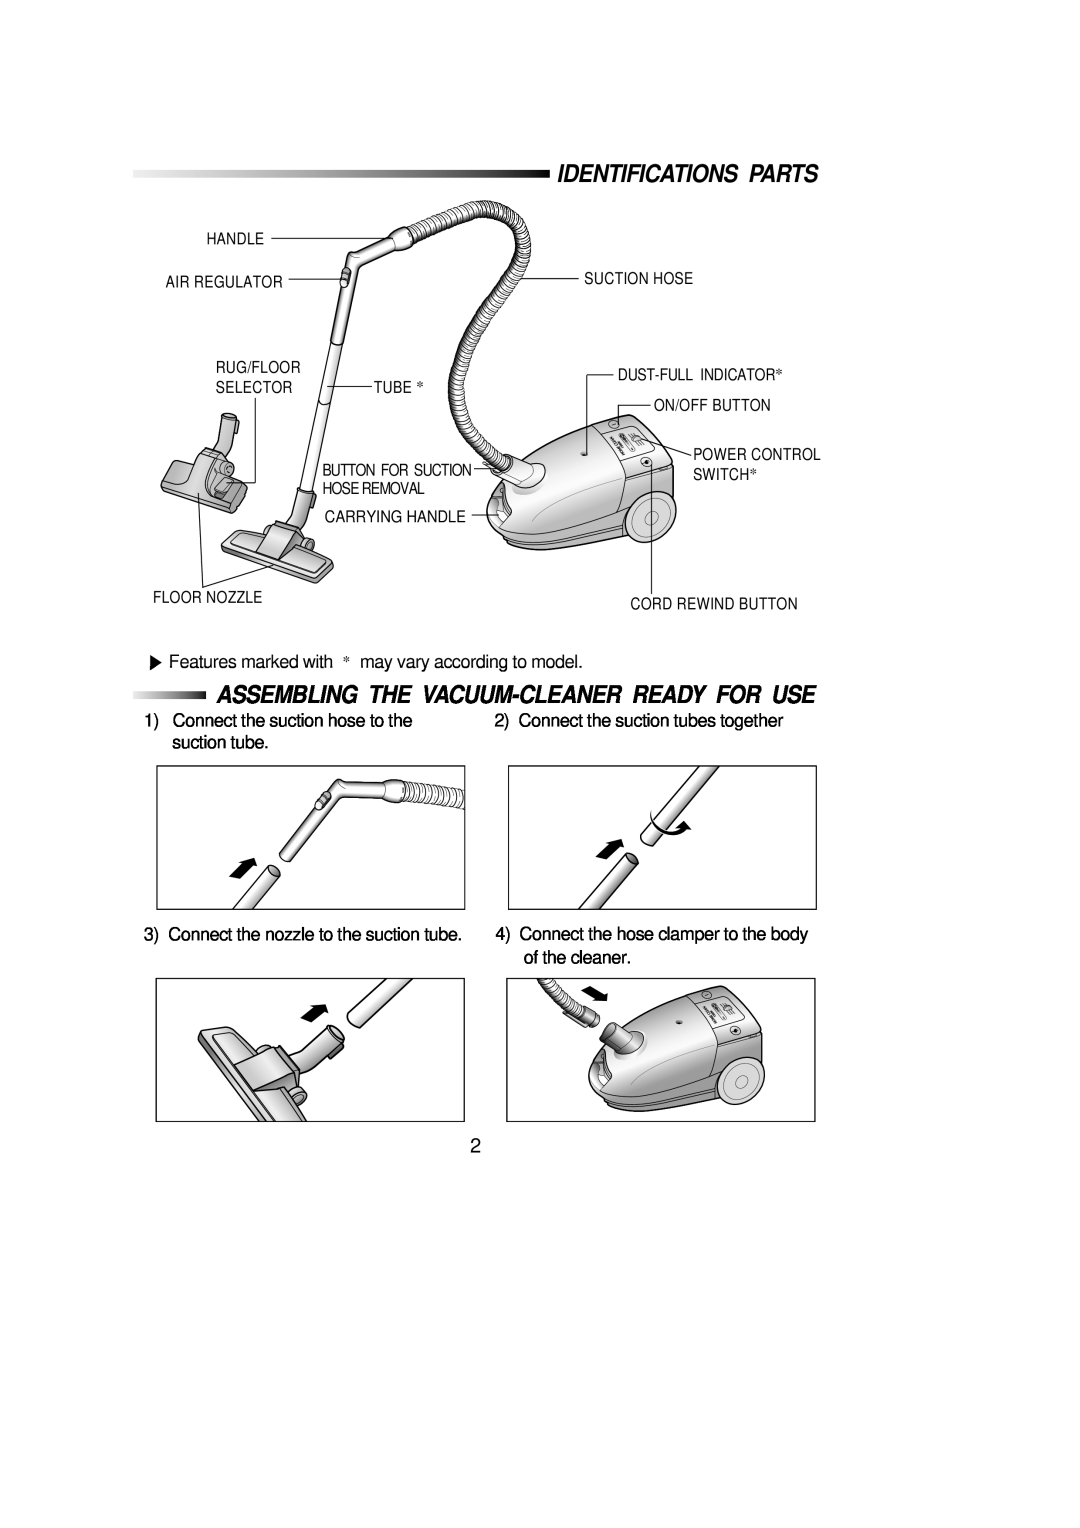 Samsung RC-5513V manual Identifications Parts, Connect the suction hose to the, suction tube, of the cleaner 